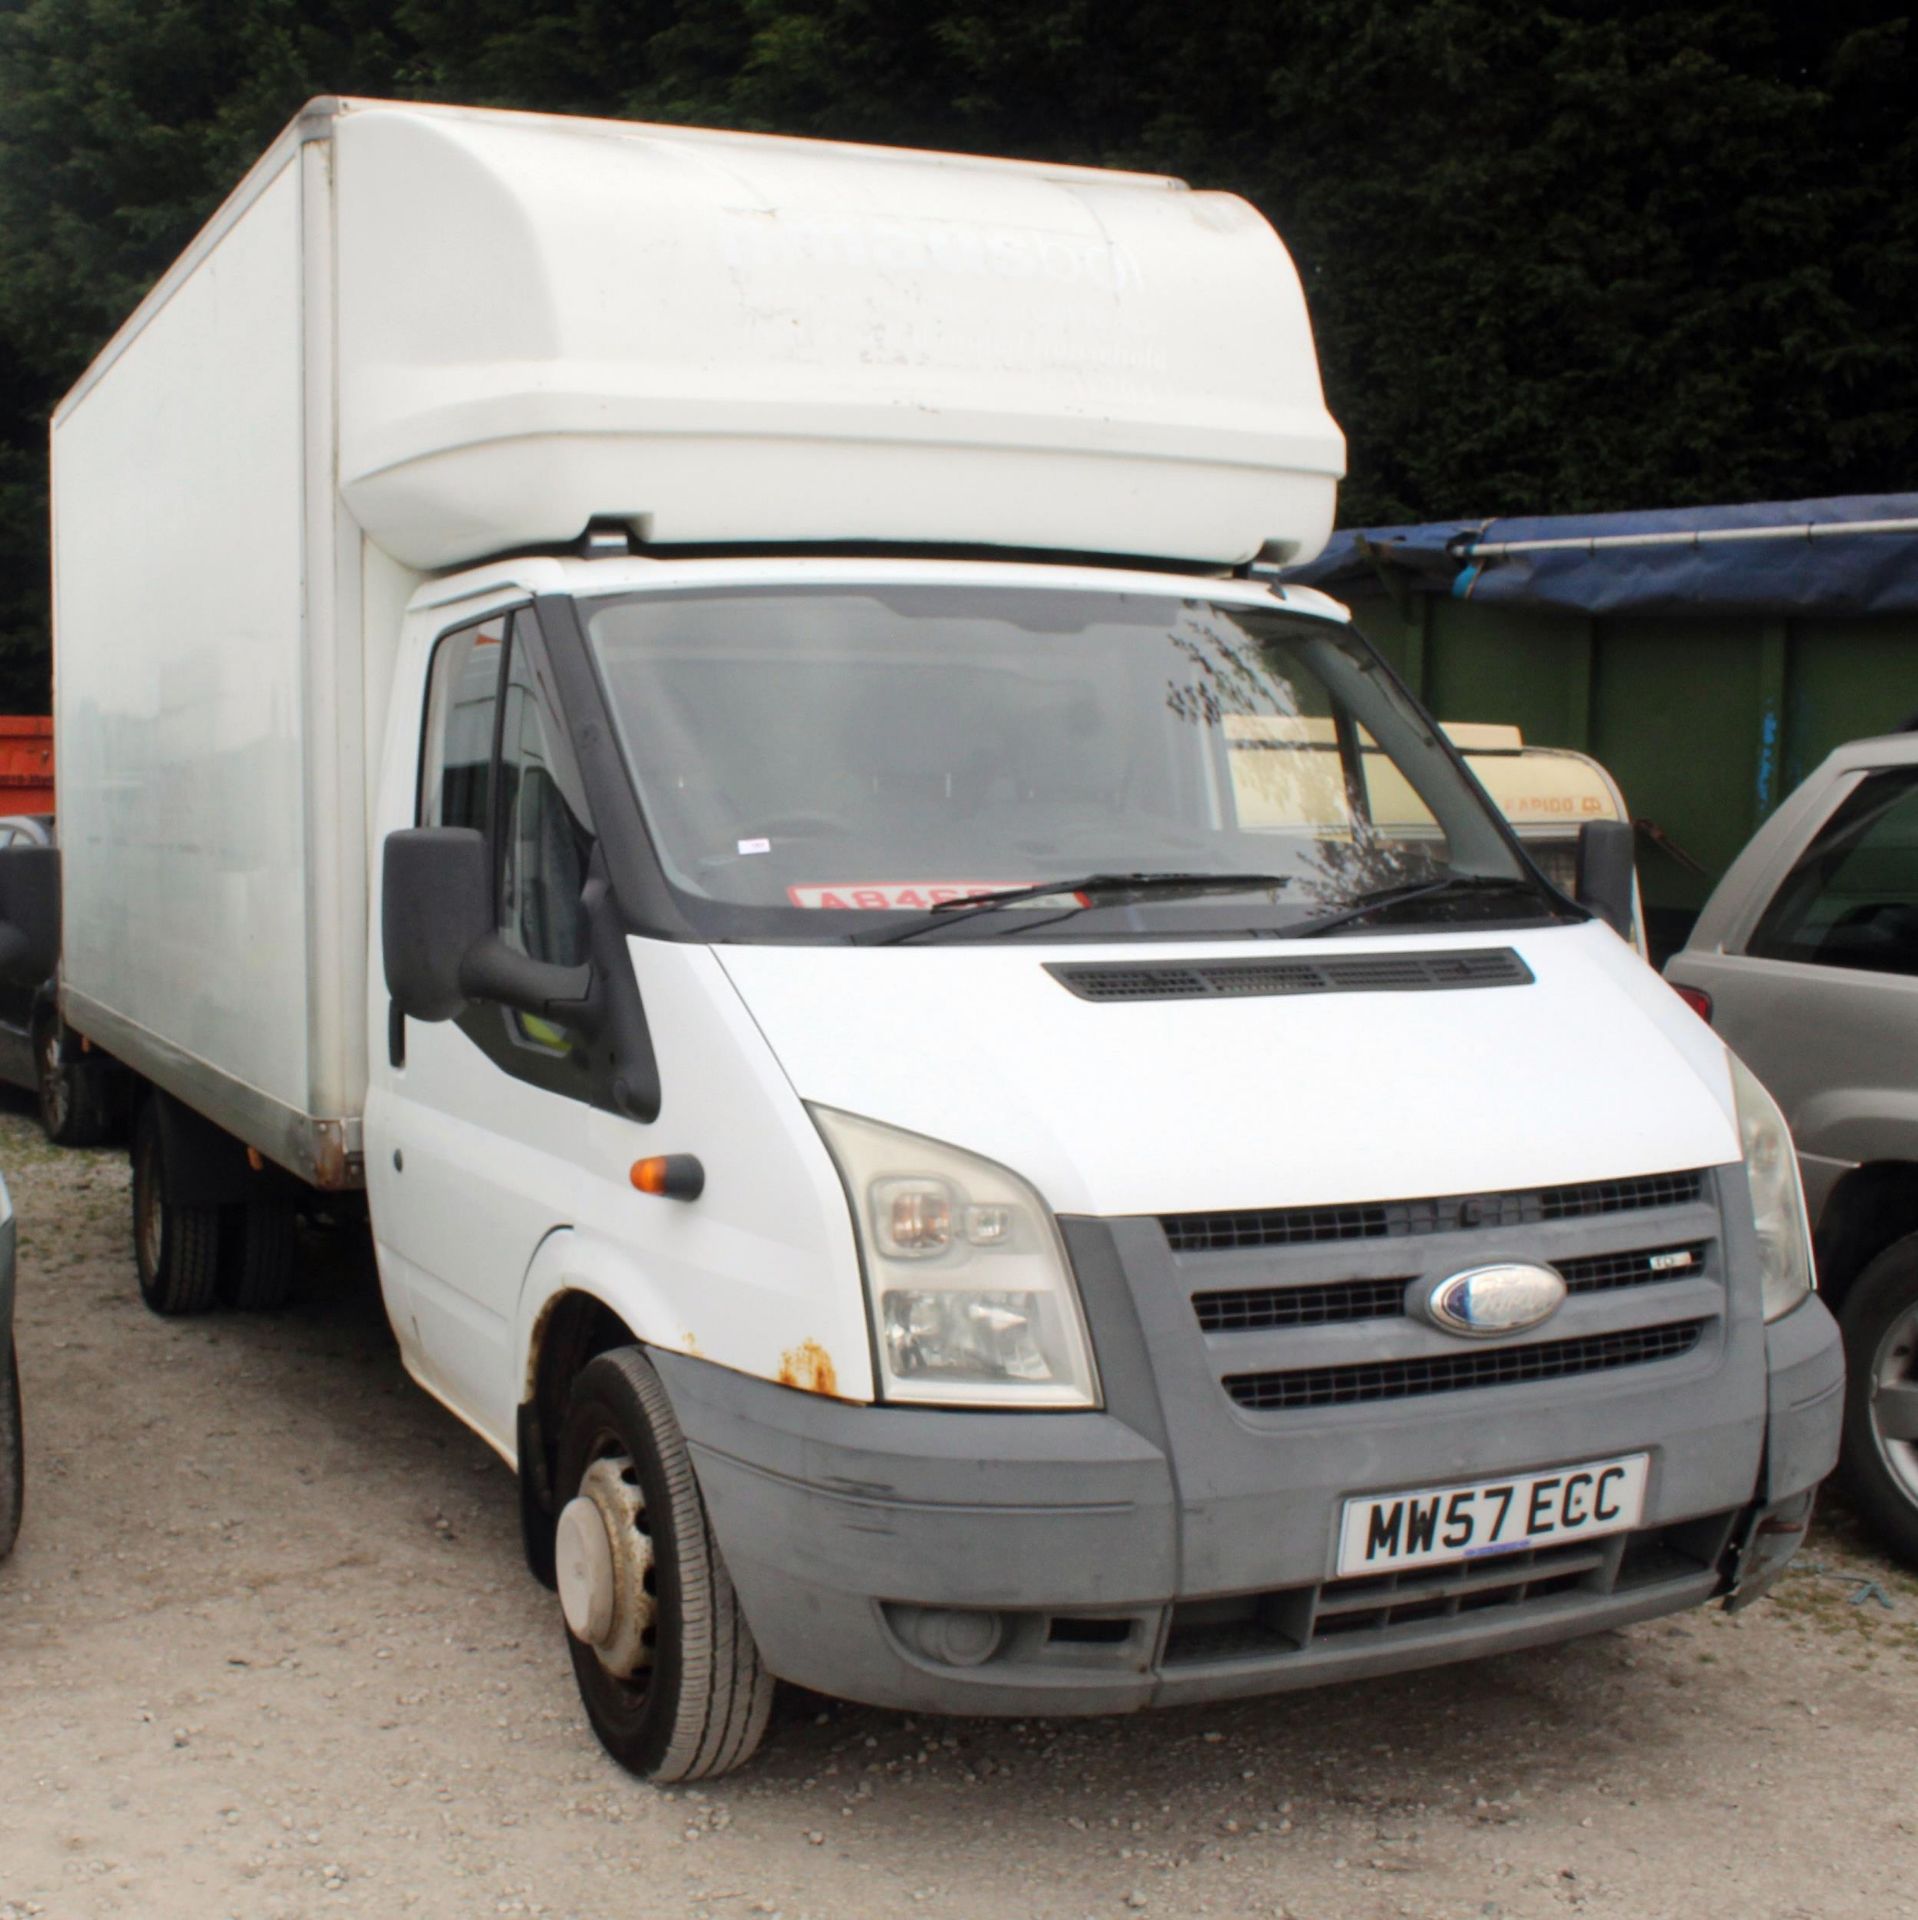 A 2008 WHITE FORD LUTON VAN WITH TAIL LIFT, REGISTRATION NUMBER MW57ECC, DIESEL ENGINE AND 129000